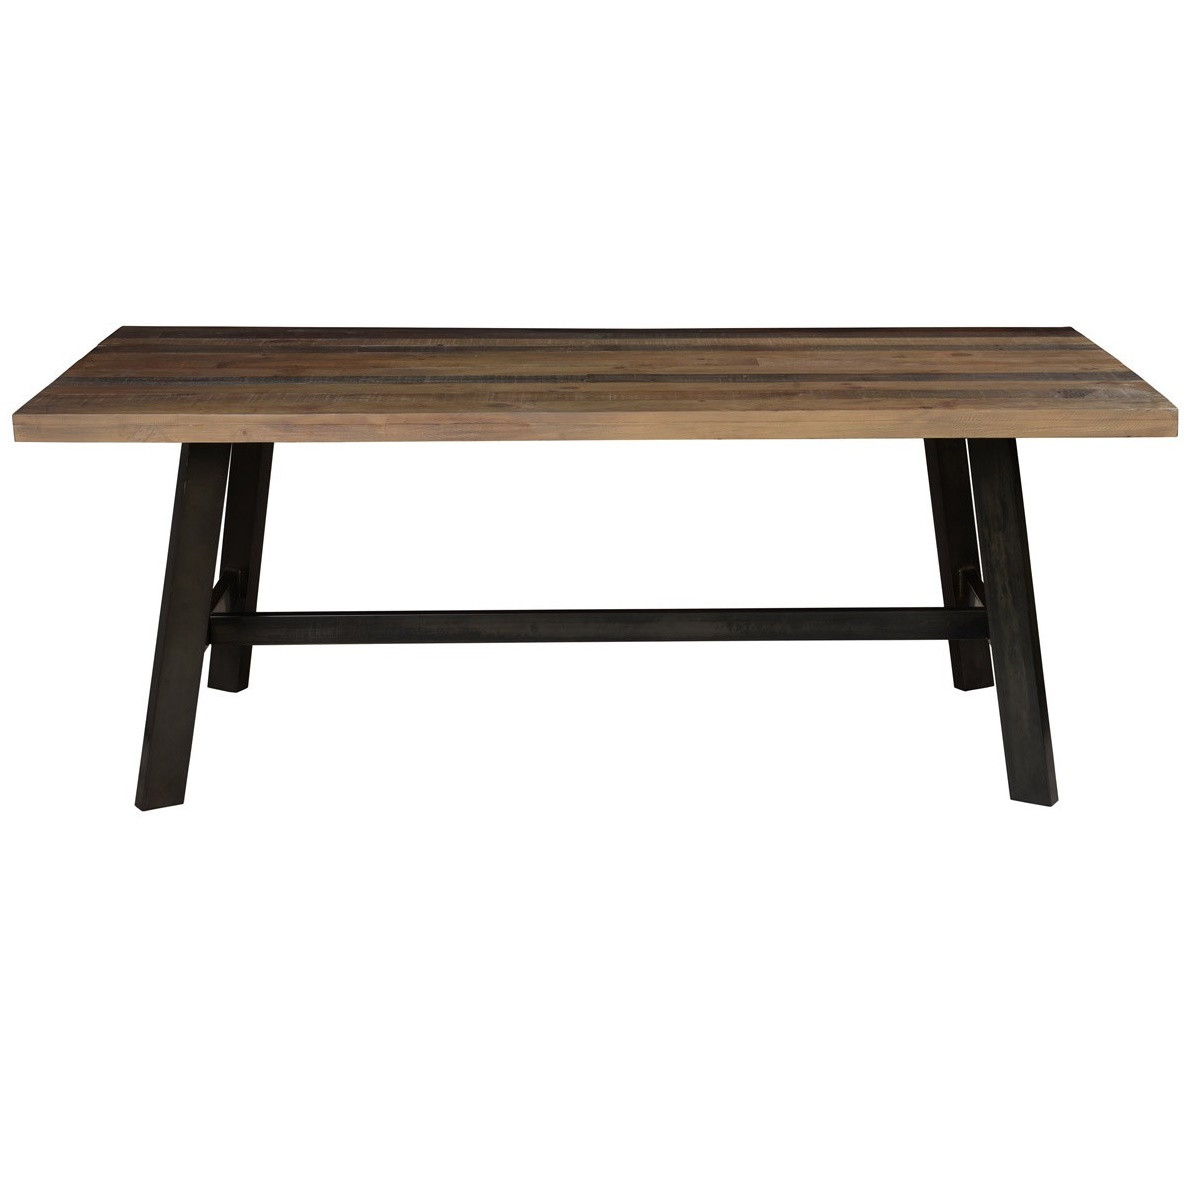 Farmhouse Rustic Reclaimed Wood Dining Table 79" | Zin Home